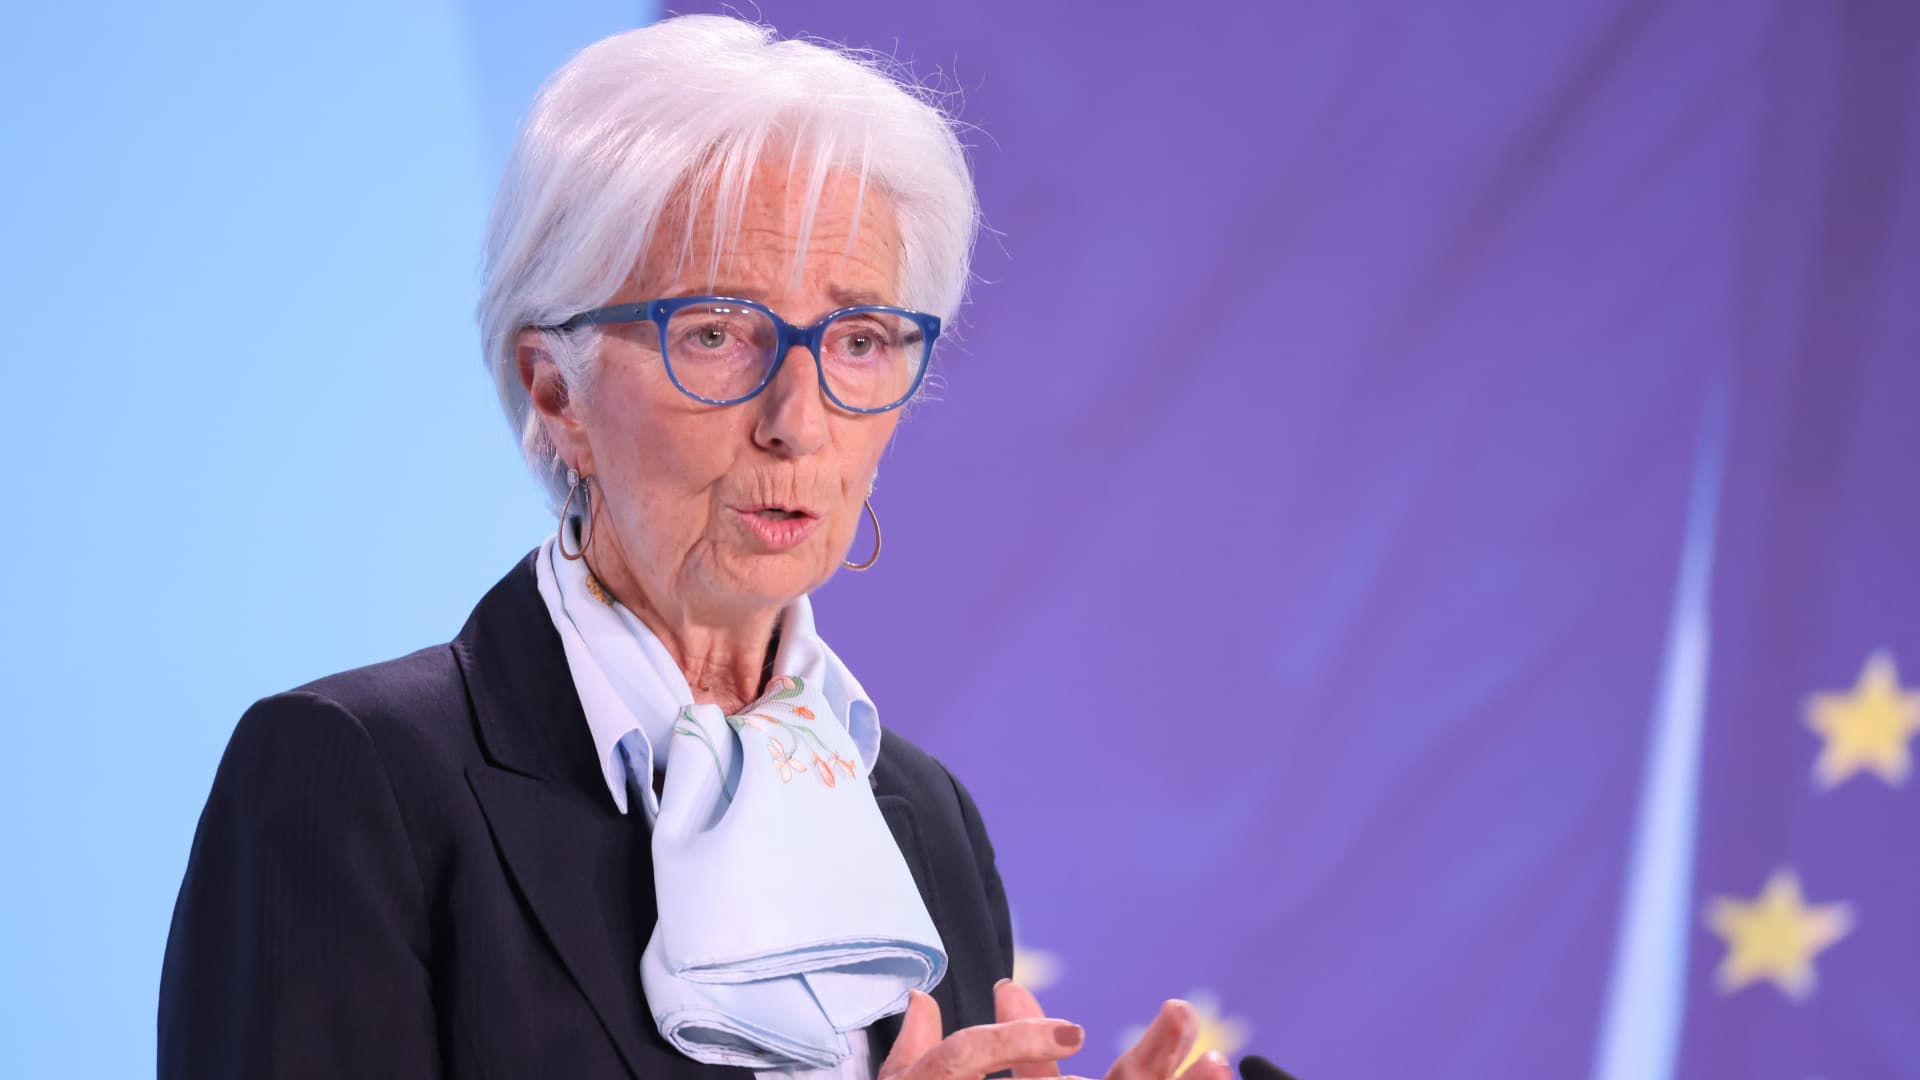 Lagarde says ECB will cut rates soon, barring any major surprises